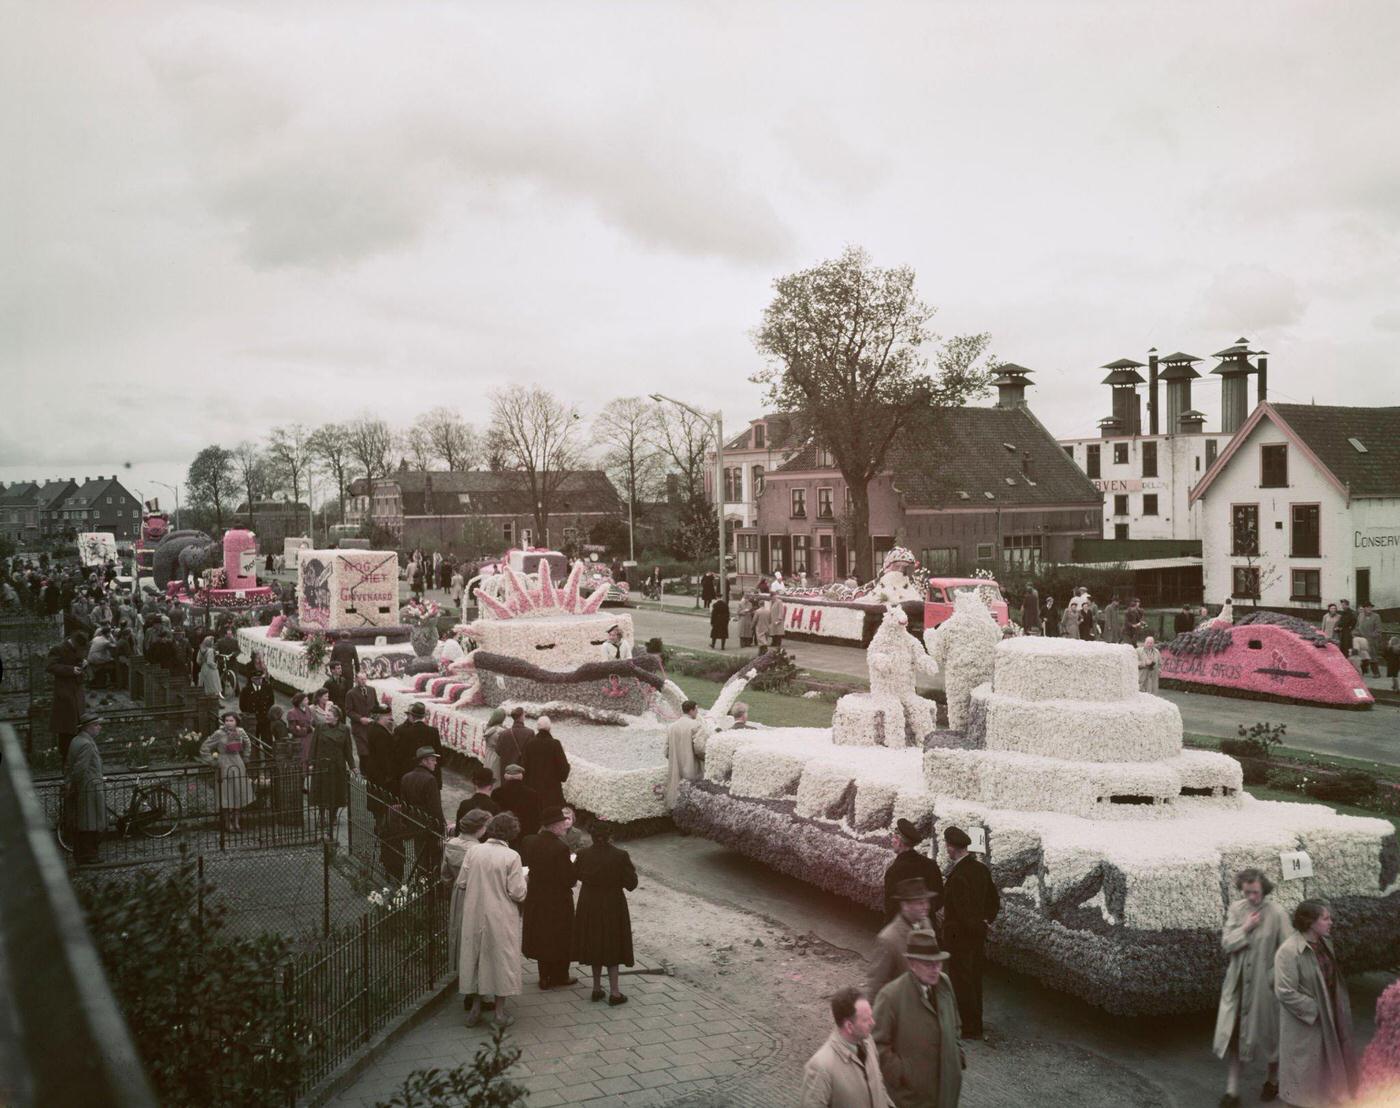 Annual Bloemencorso Bollenstreek flower procession through the streets of Hillegom, Lisse, and Sassenheim in the province of South Holland, Netherlands, in April 1951.